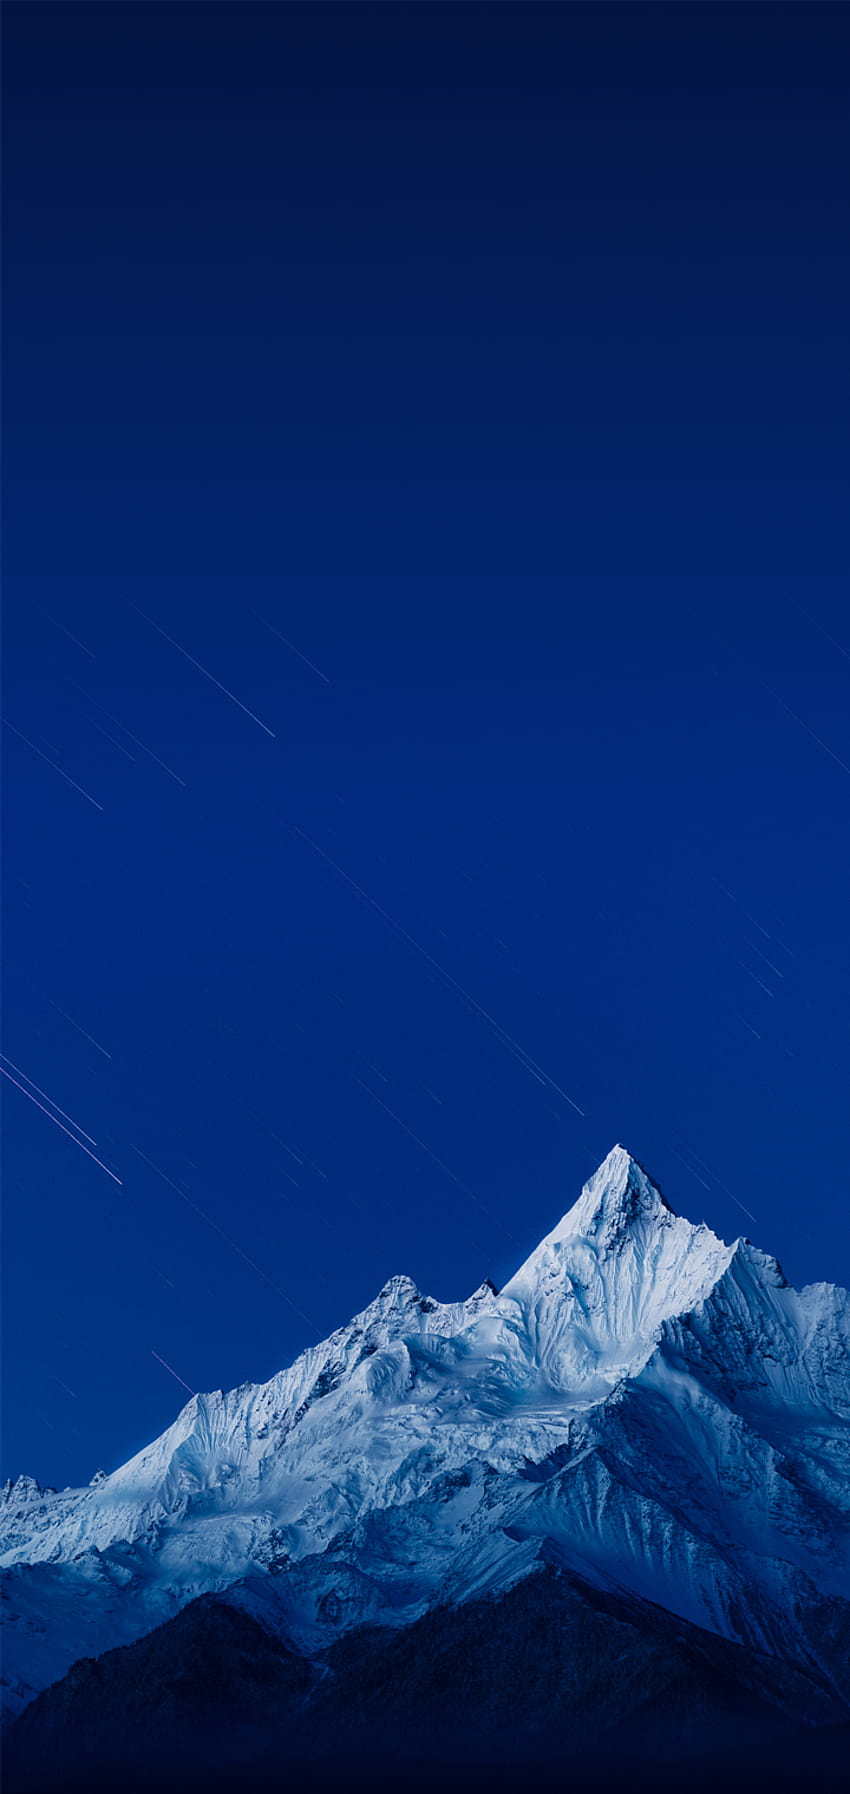 Oppo A3 Stock, phone mountain blue HD phone wallpaper